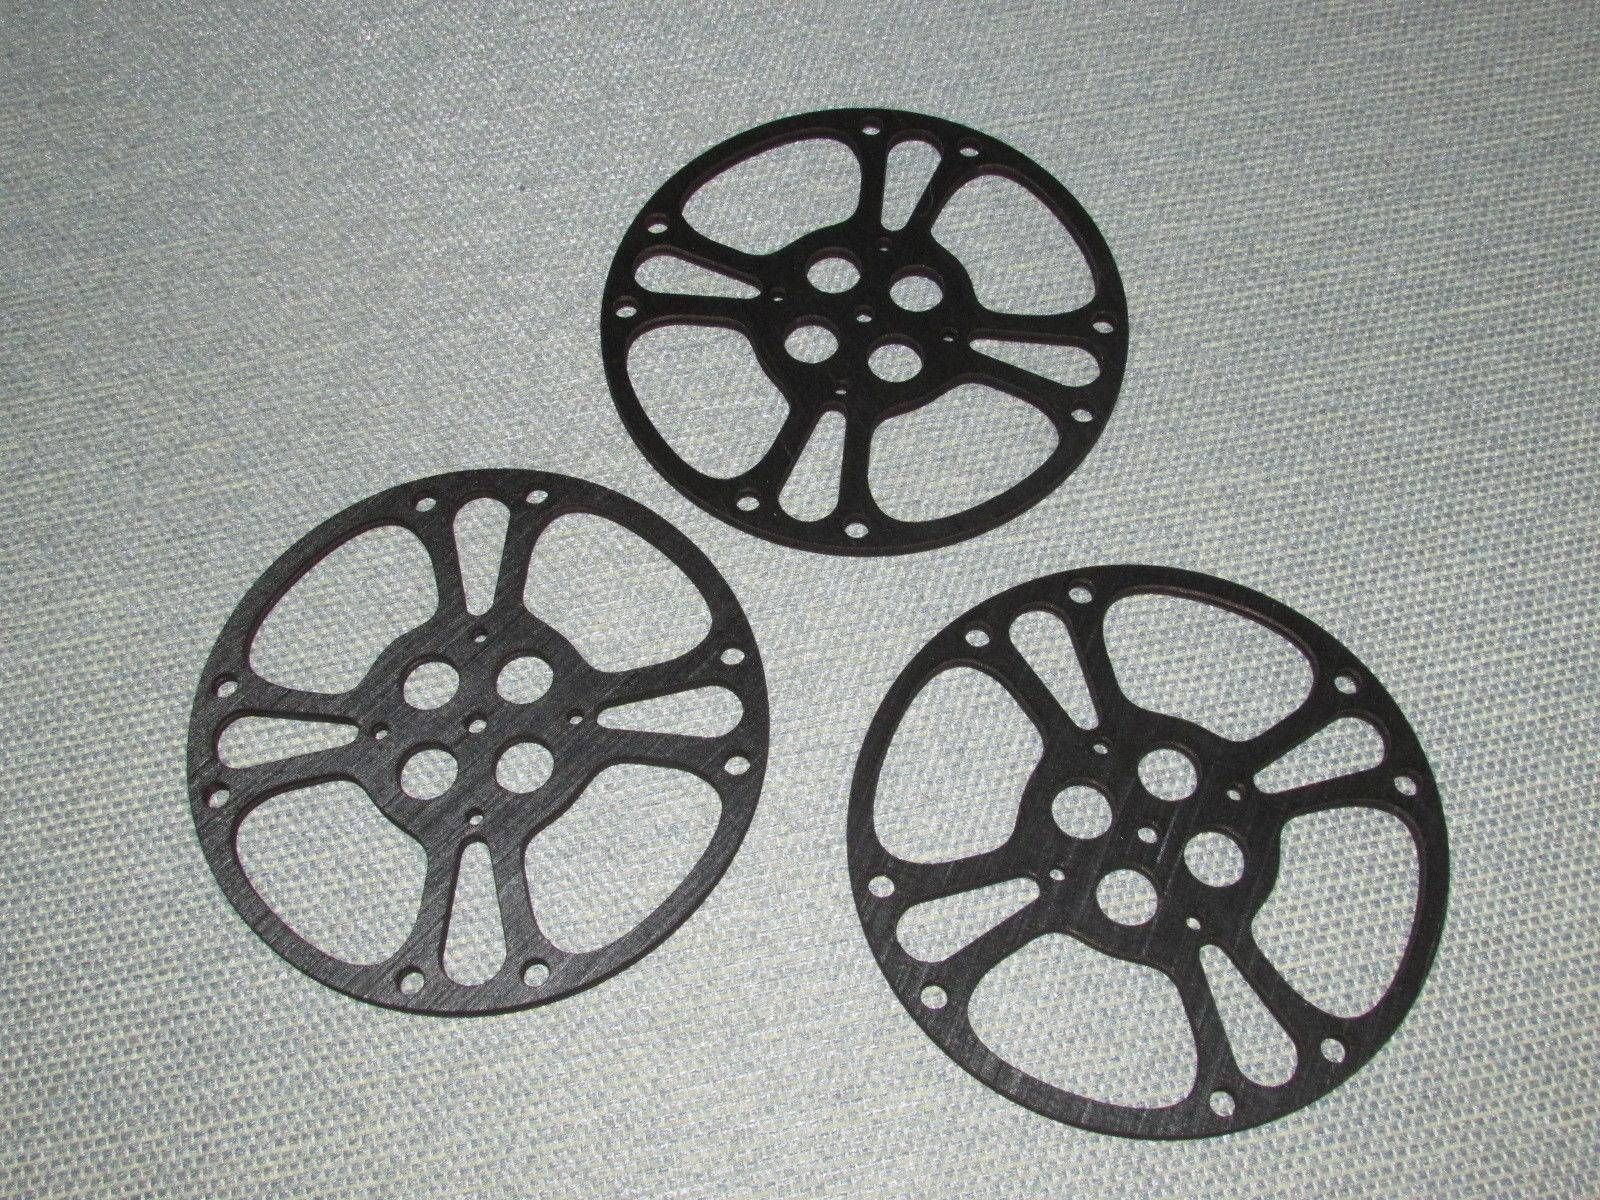 Gorgeous Movie Reel Wall Art Intended For Current Film Reel Wall Art (View 12 of 30)